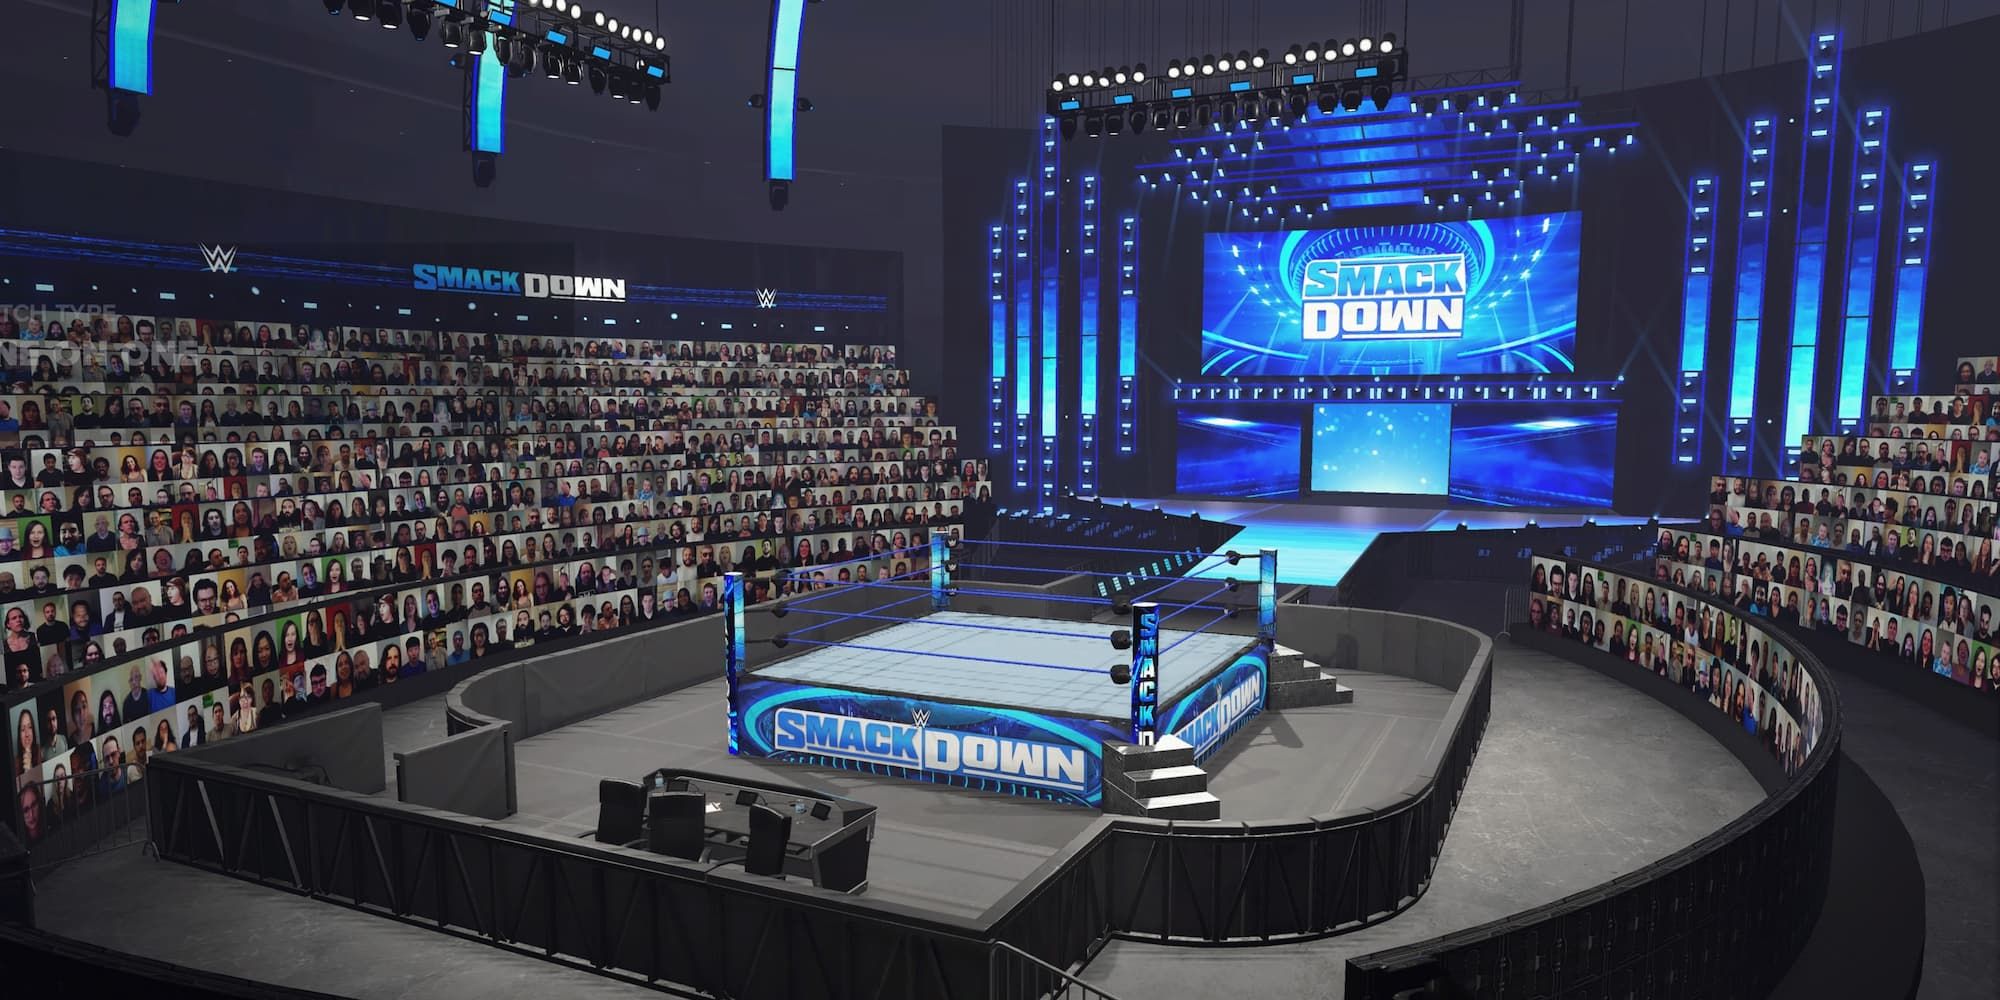 The SmackDown Thunderdome has many screens with fans' faces on them in WWE 2K23.